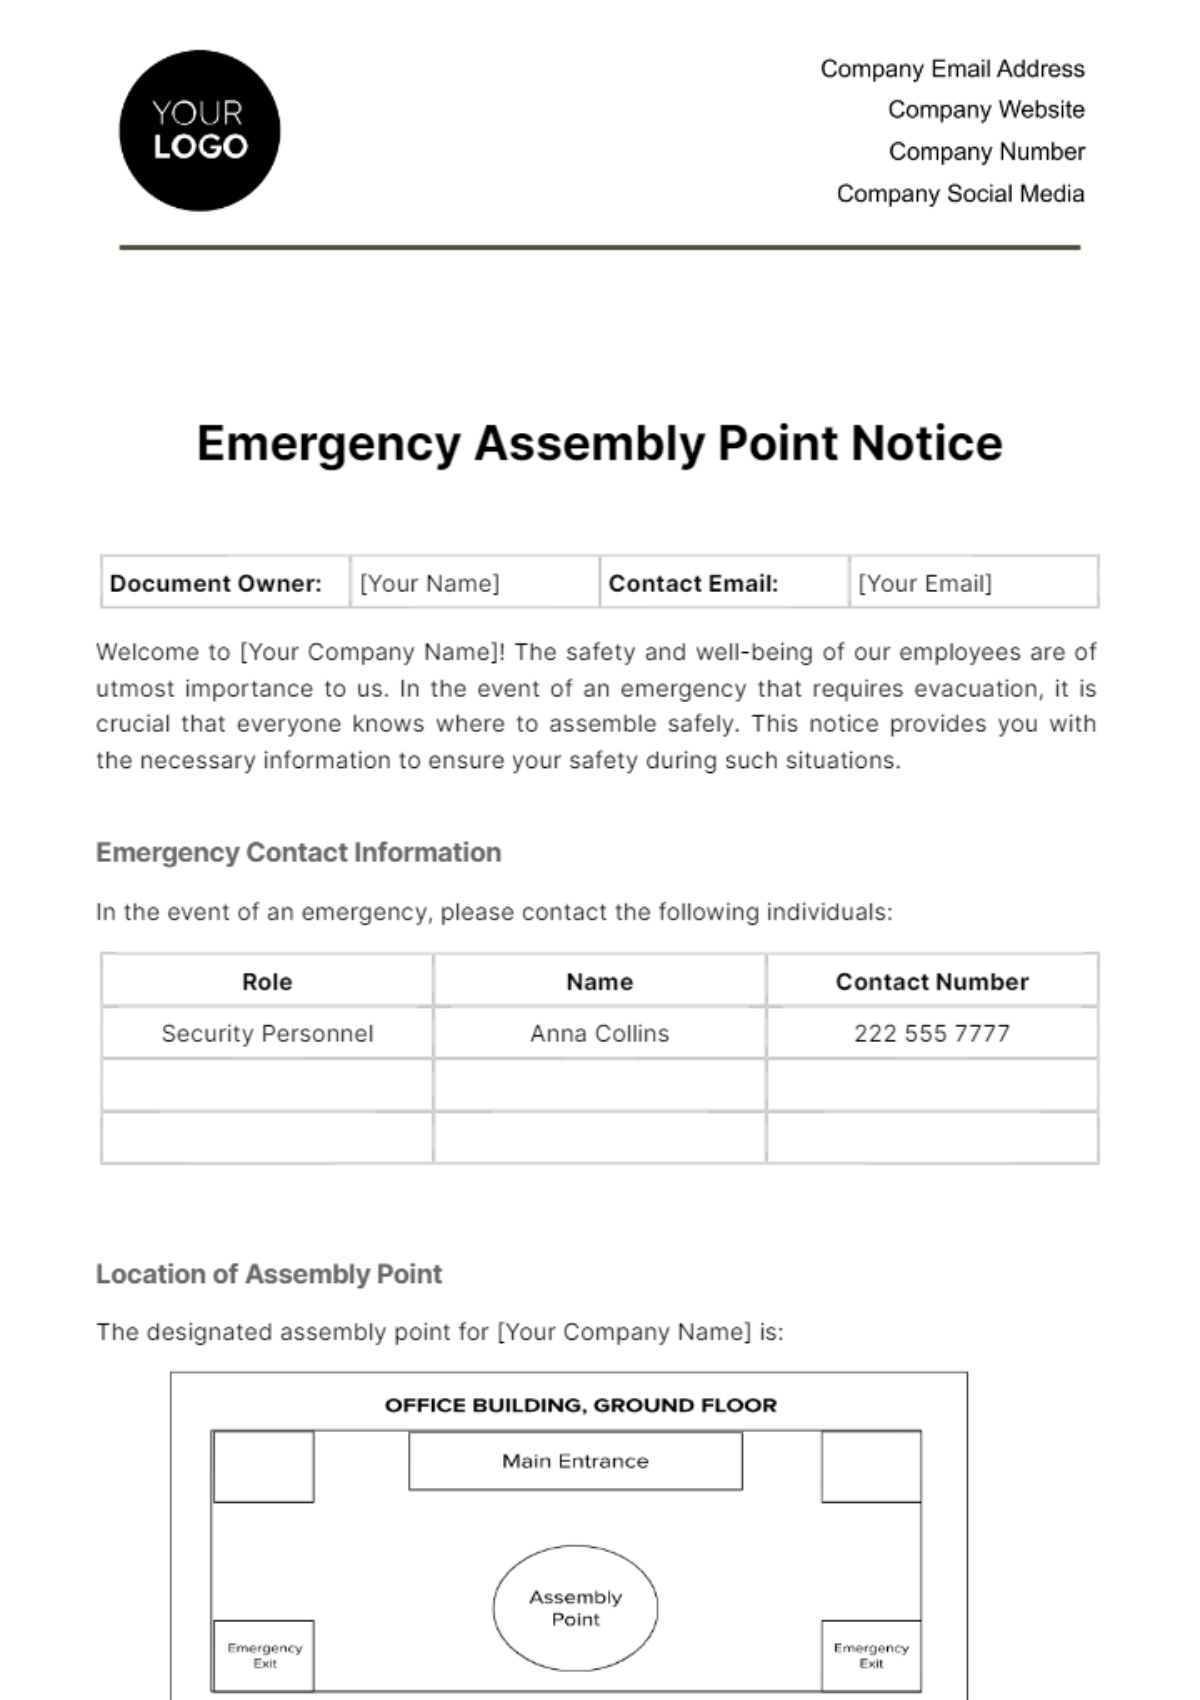 Emergency Assembly Point Notice HR Template